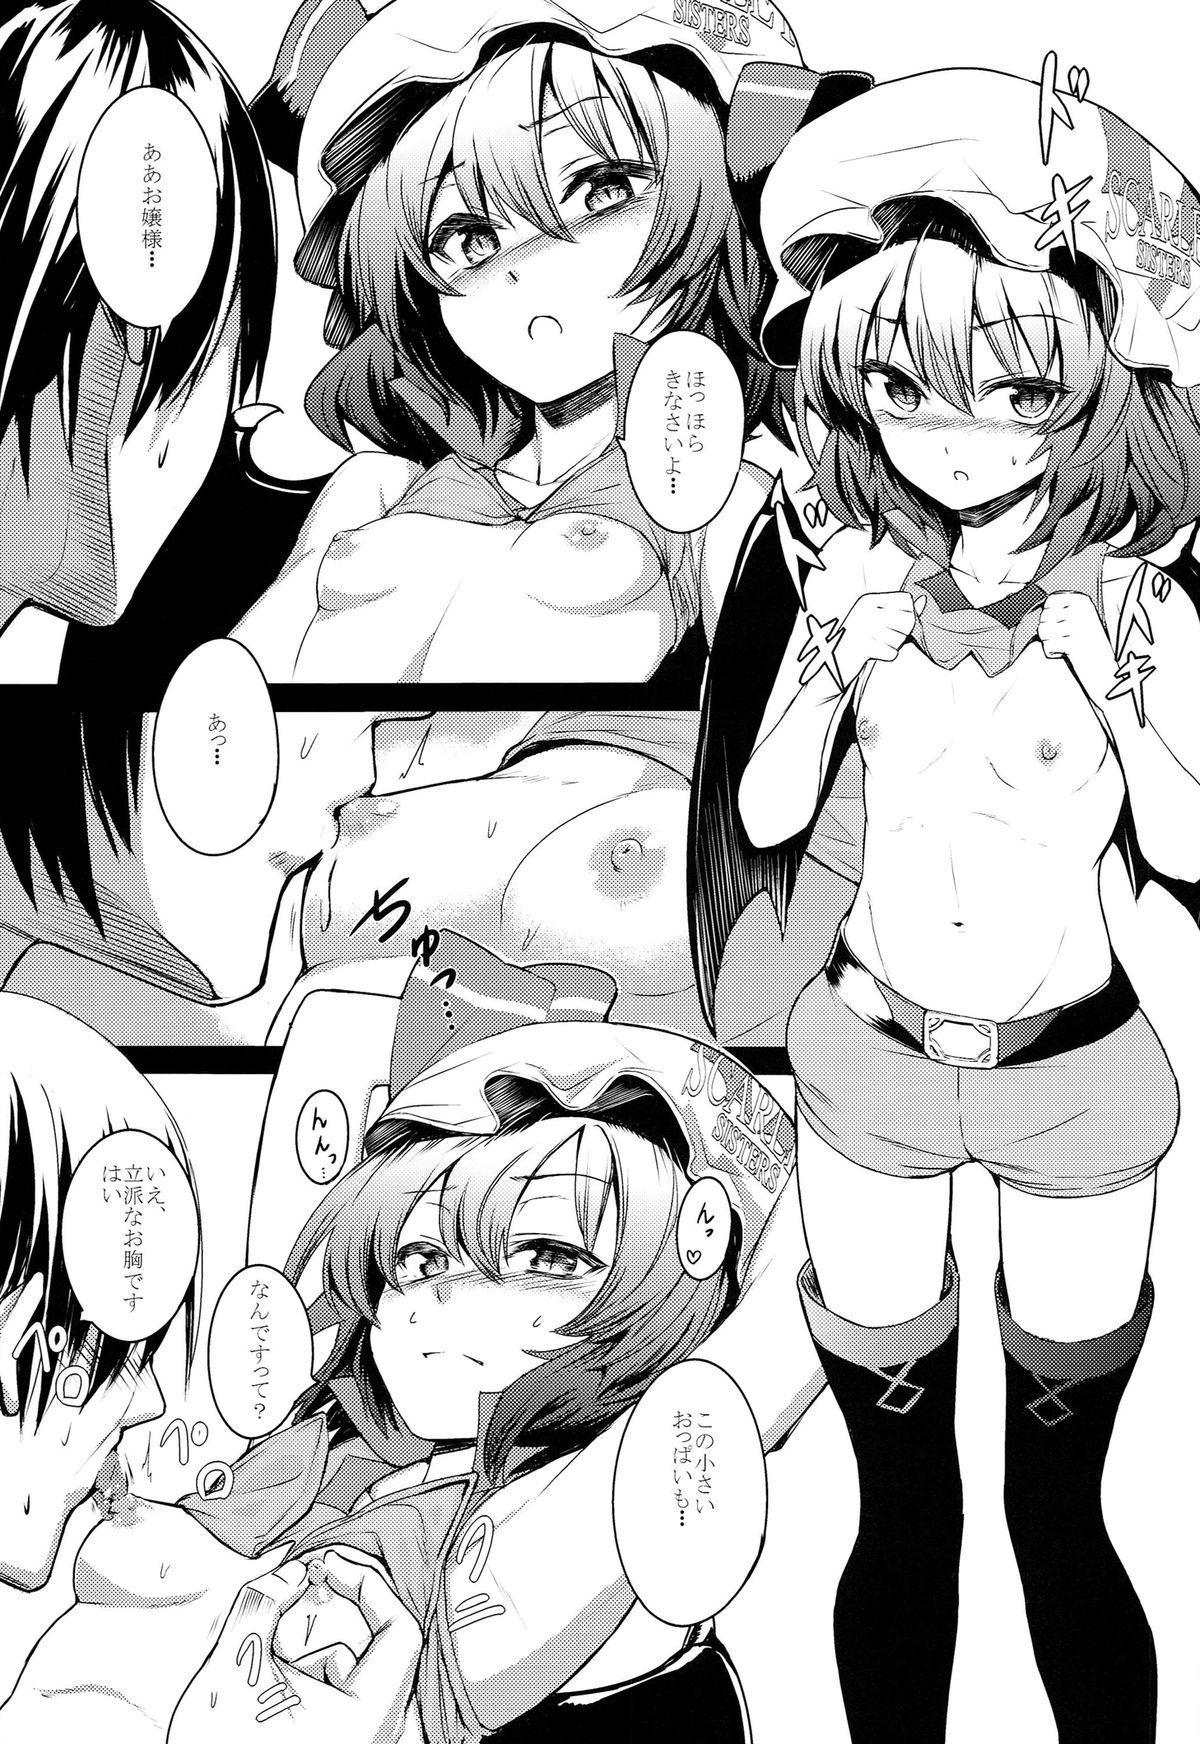 Masturbate TOUHOU RACE QUEENS COLLABO CLUB - Touhou project Free Fucking - Page 6